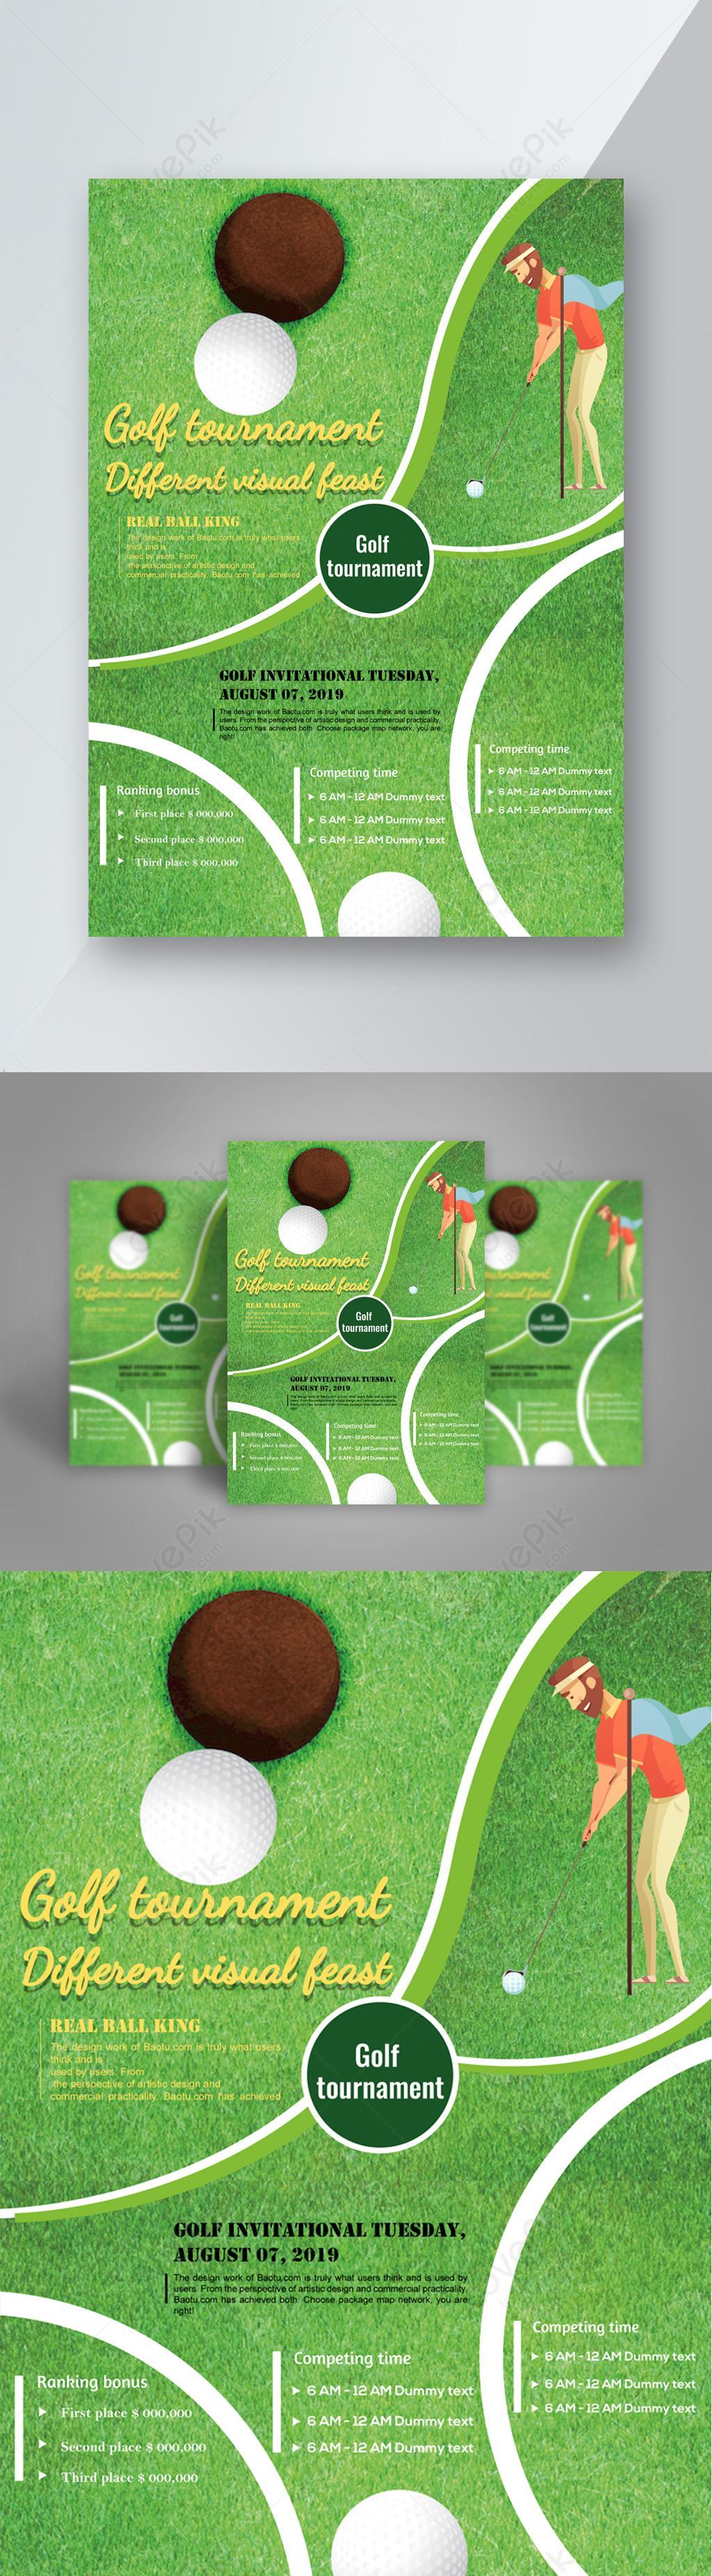 Golf Tournament Flyers Template from img.lovepik.com